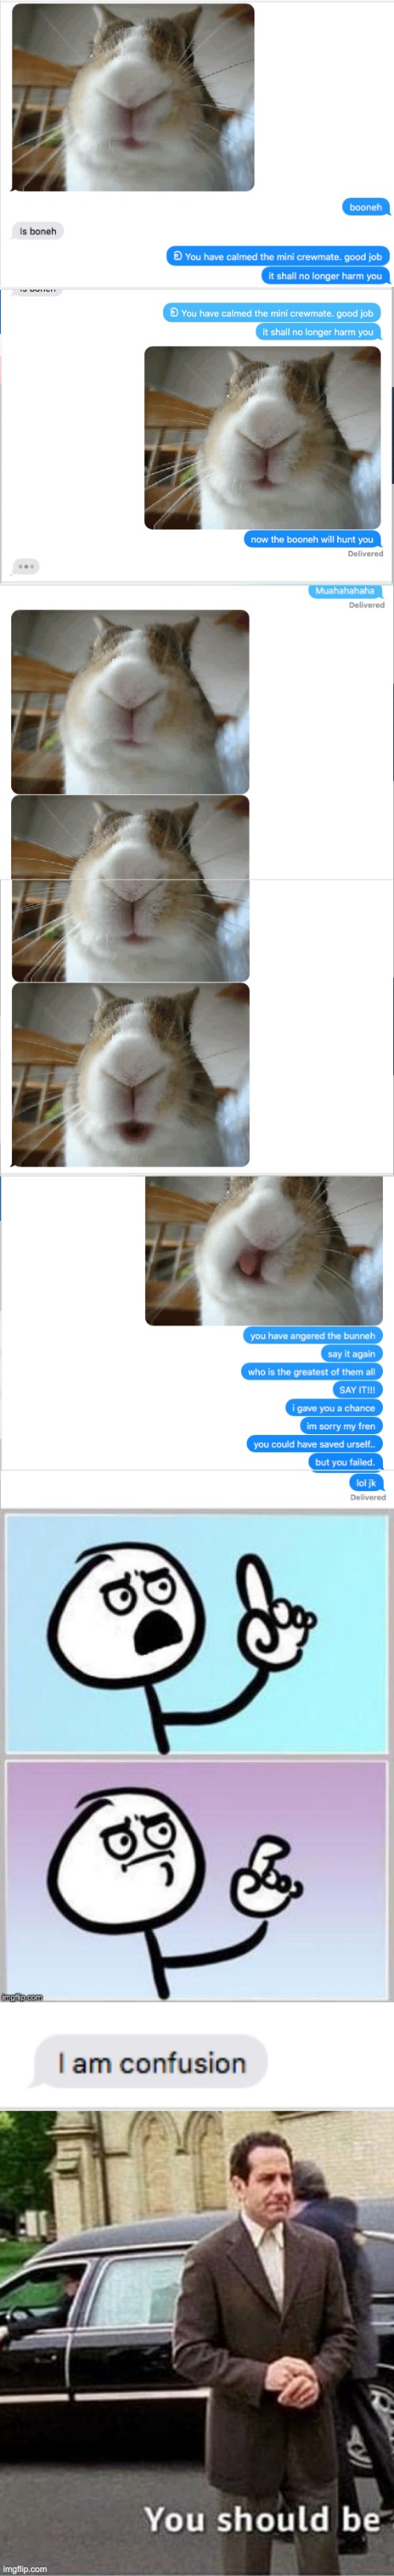 This is the greatest conversation of my life by far | image tagged in umm,you should be ashamed of yourself,hol up,excuse me wtf | made w/ Imgflip meme maker